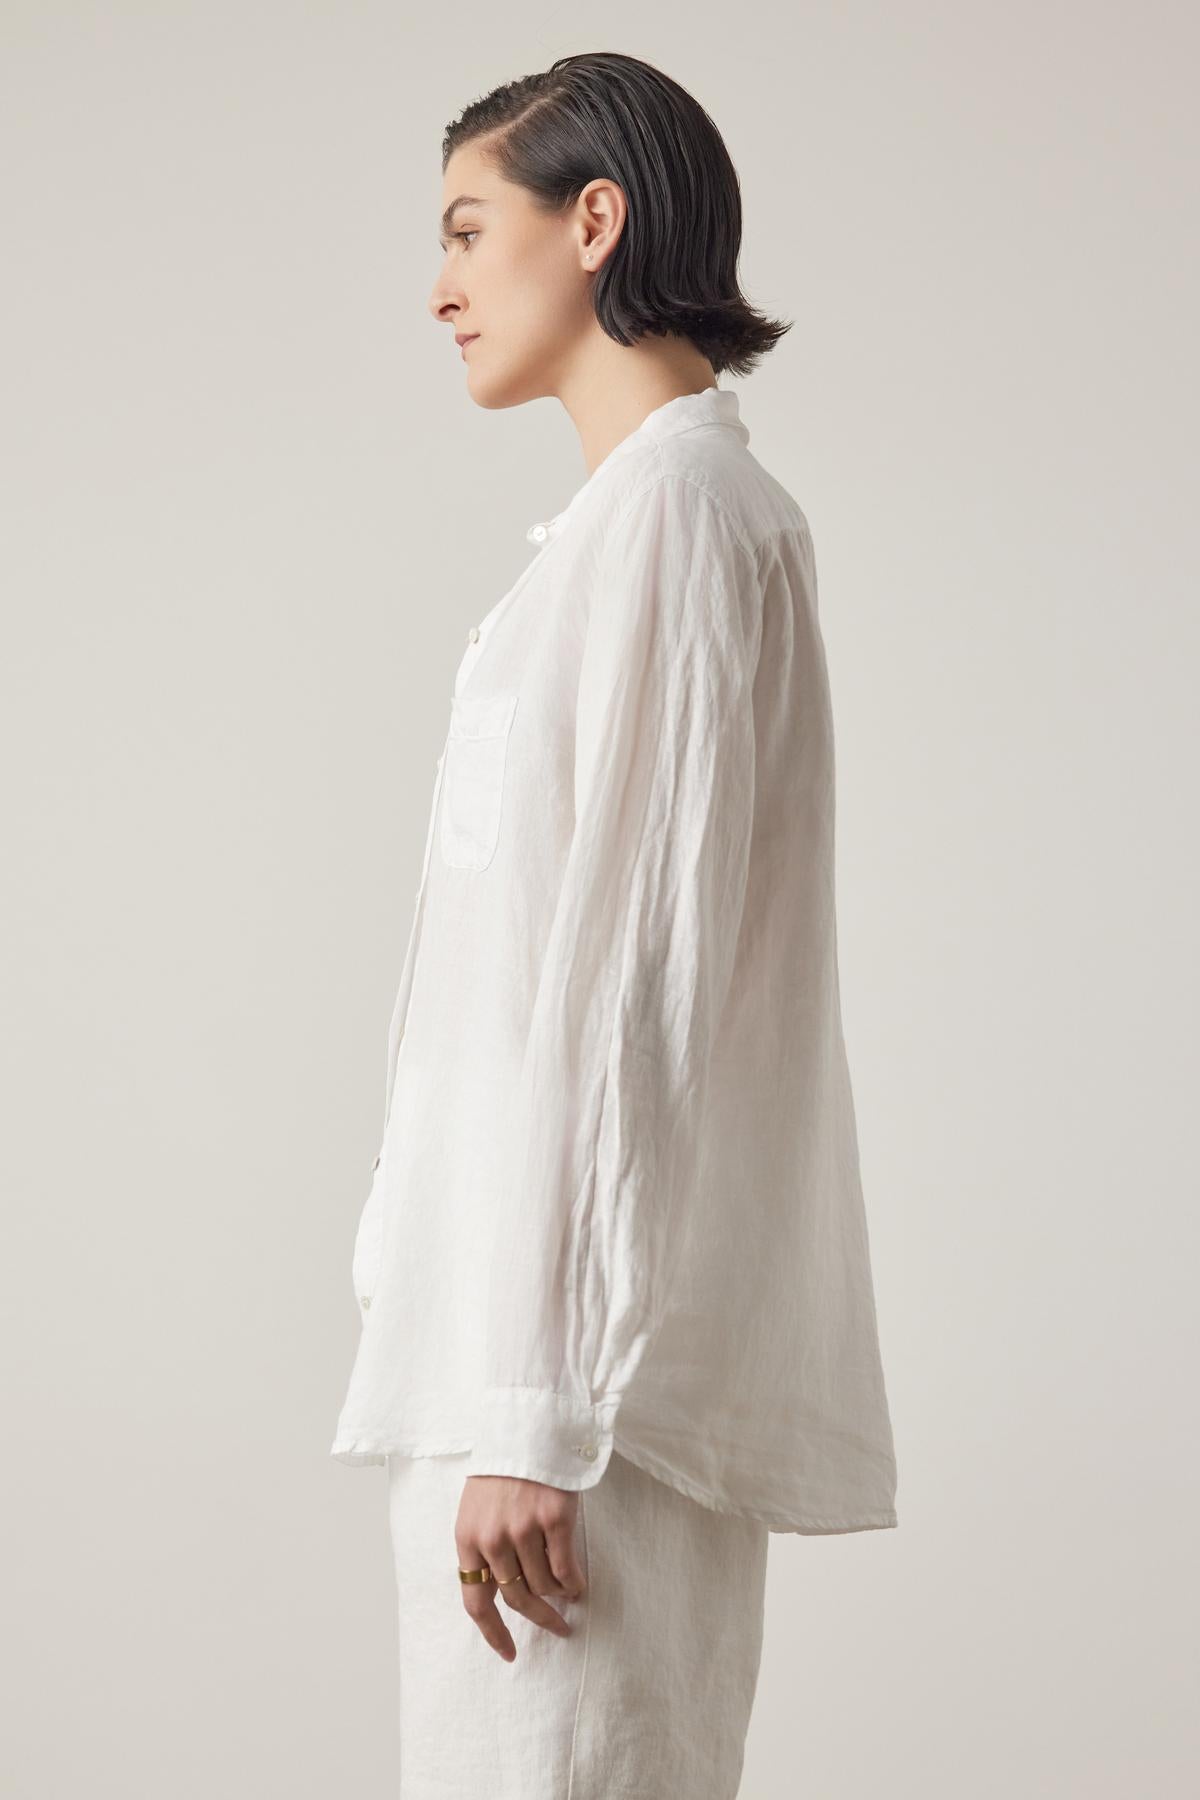 A person with short hair is standing in profile, wearing a loose-fitting, long-sleeved white MULHOLLAND LINEN SHIRT by Velvet by Jenny Graham with a relaxed silhouette and white pants against a plain background.-37018505150657